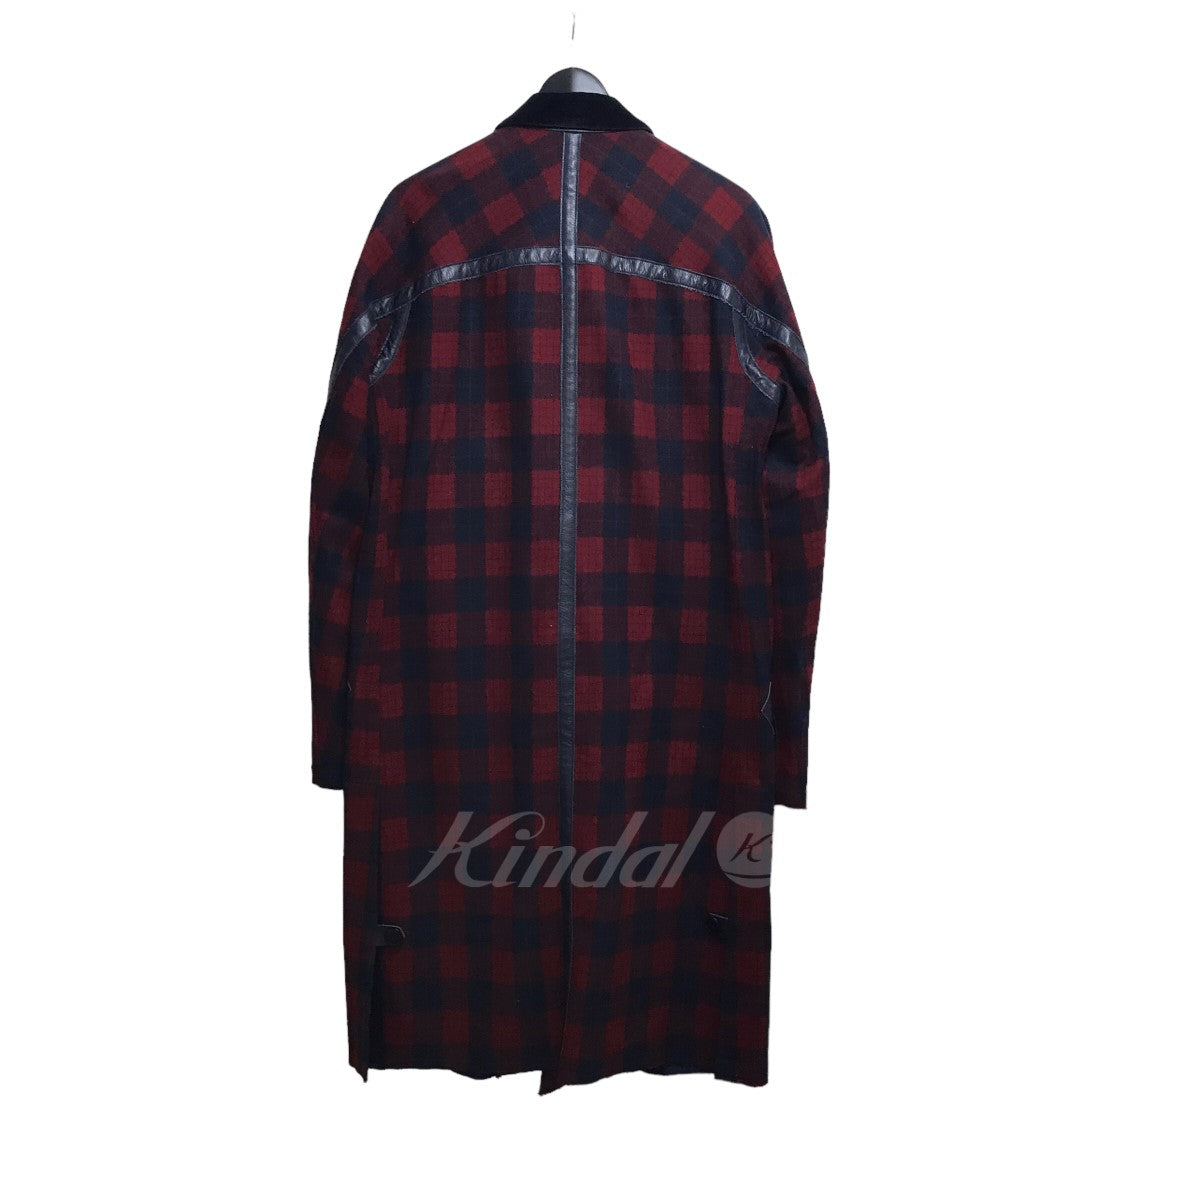 JohnUNDERCOVER×PENDLETON 16AW チェスターコート JUP9302-1 JUP9302-1 